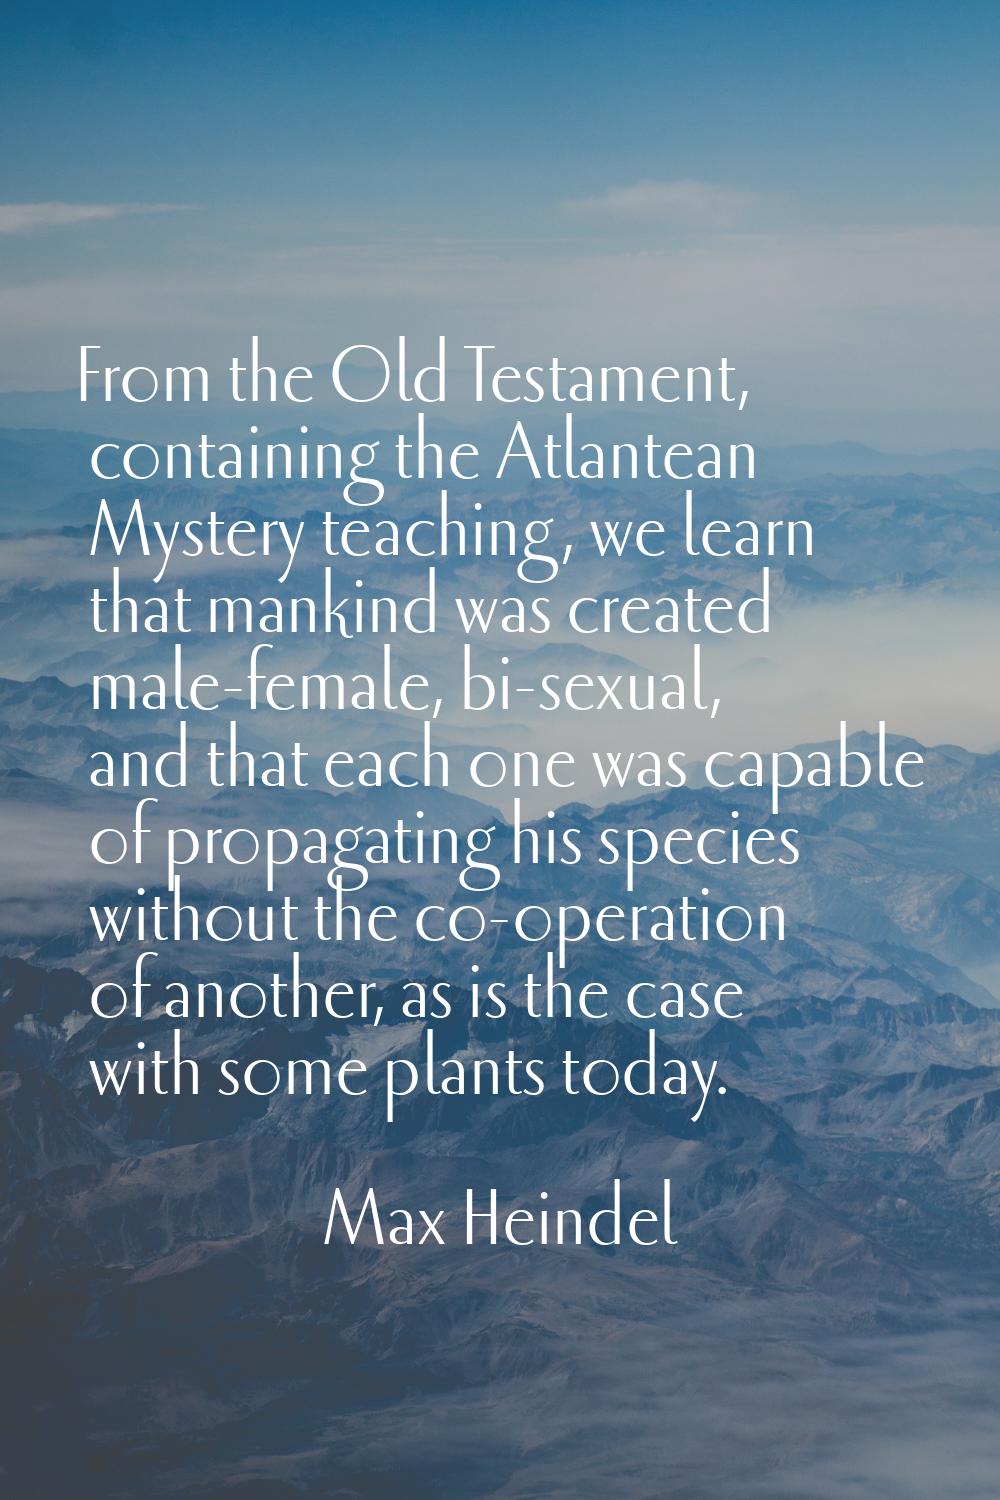 From the Old Testament, containing the Atlantean Mystery teaching, we learn that mankind was create